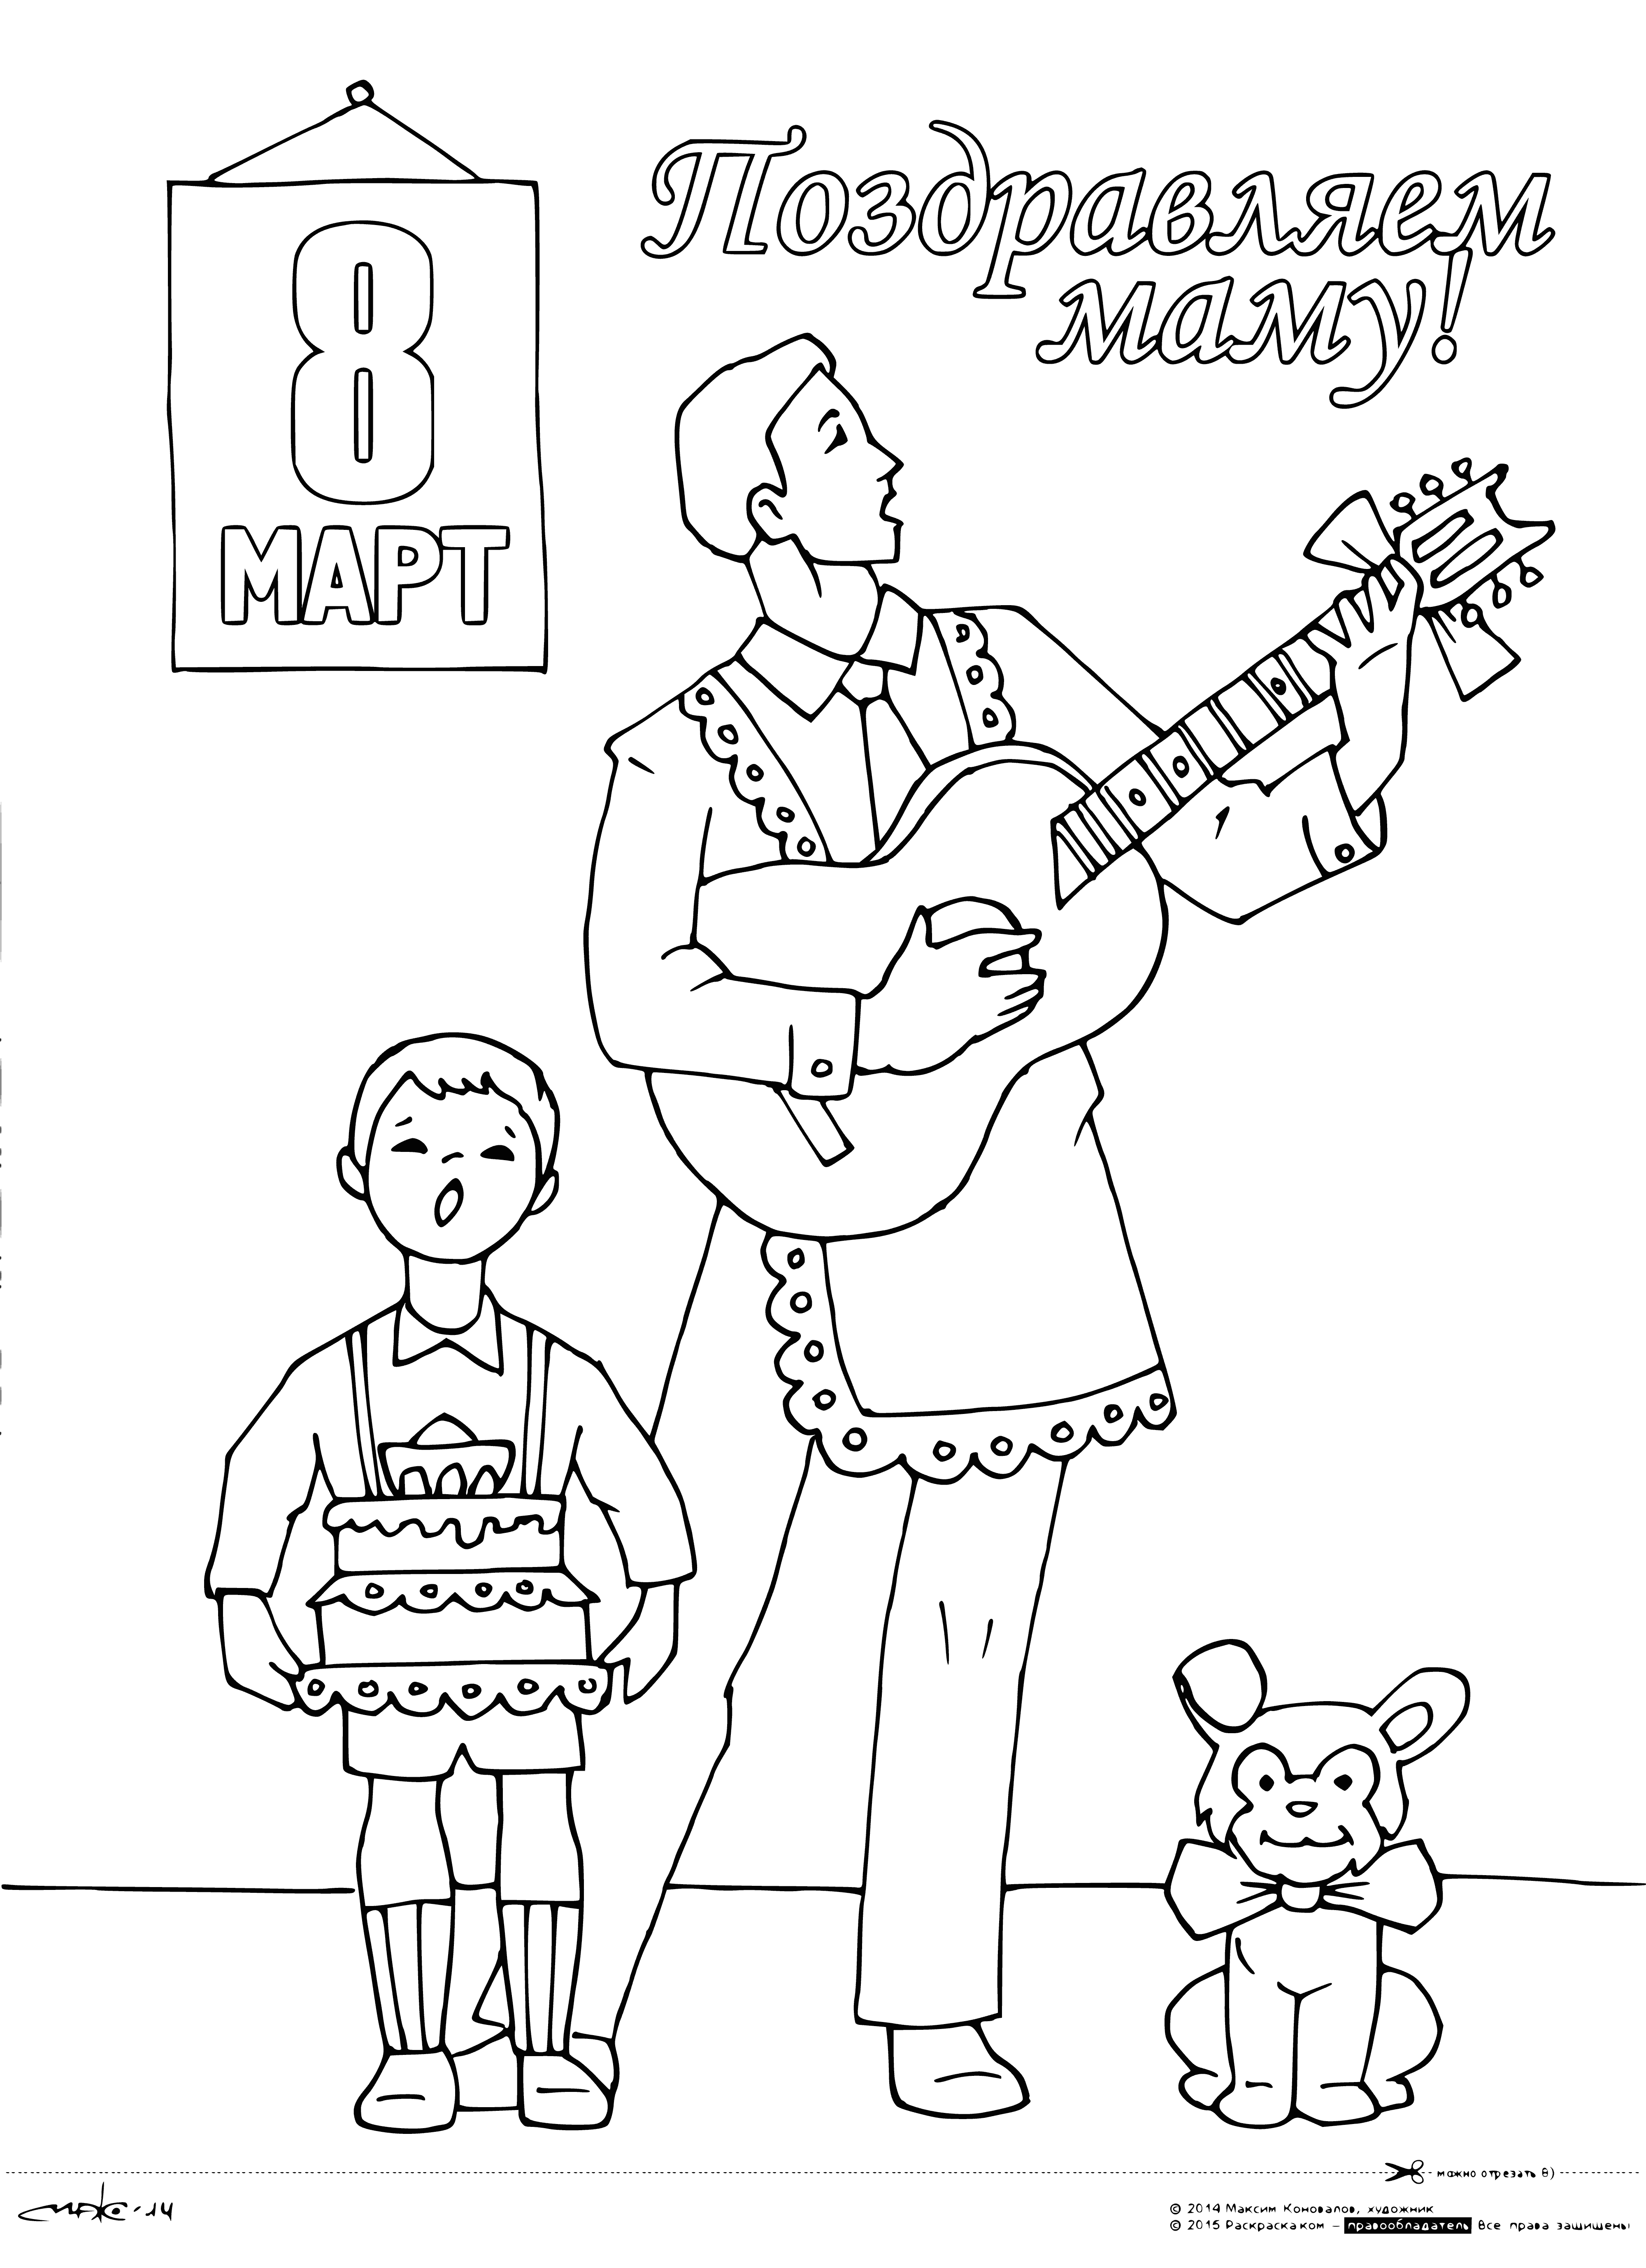 coloring page: Woman stands in front of brick house wearing white shirt, blue skirt, holding flowers & card saying "Congratulations to mom!".